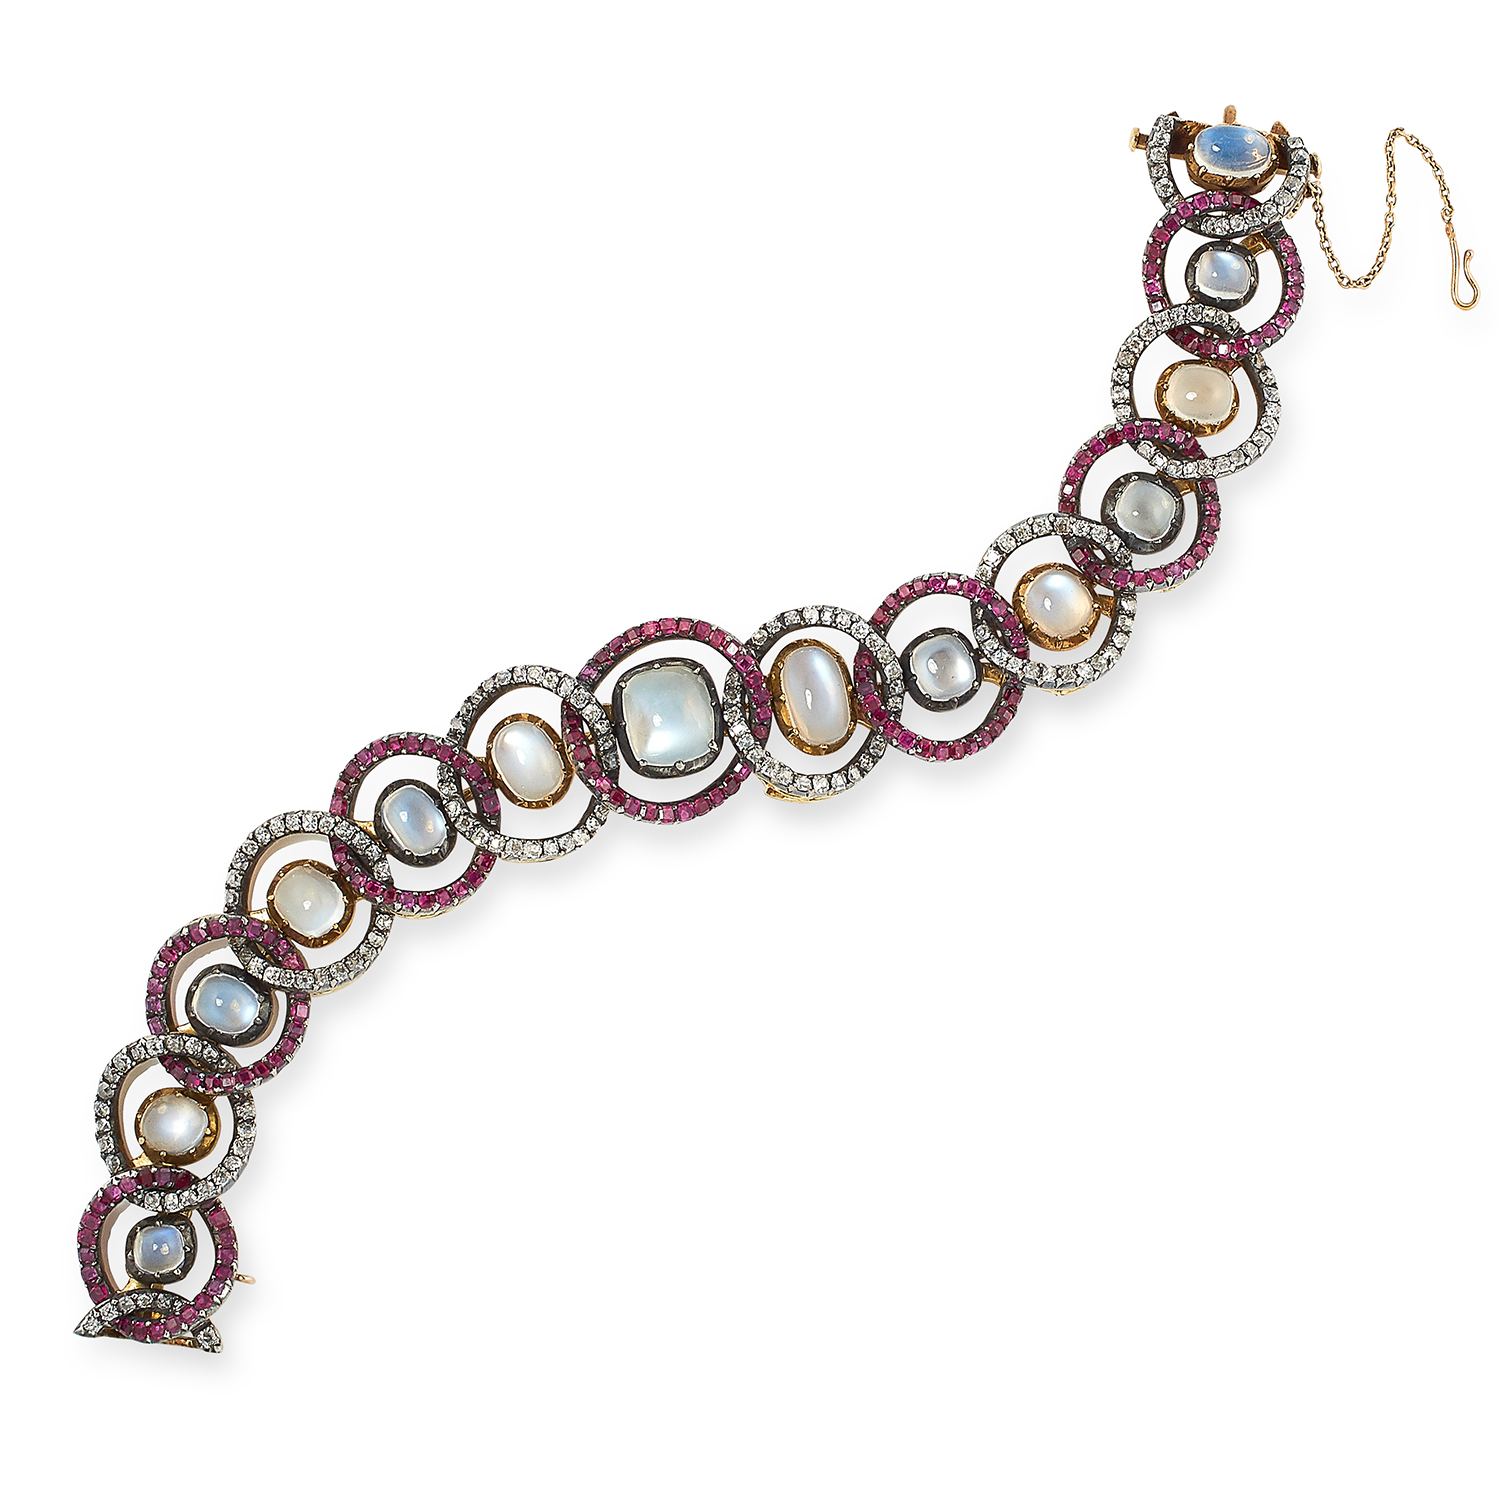 ANTIQUE MOONSTONE, RUBY AND DIAMOND BRACELET, 19TH CENTURY set with cabochon moonstones in borders